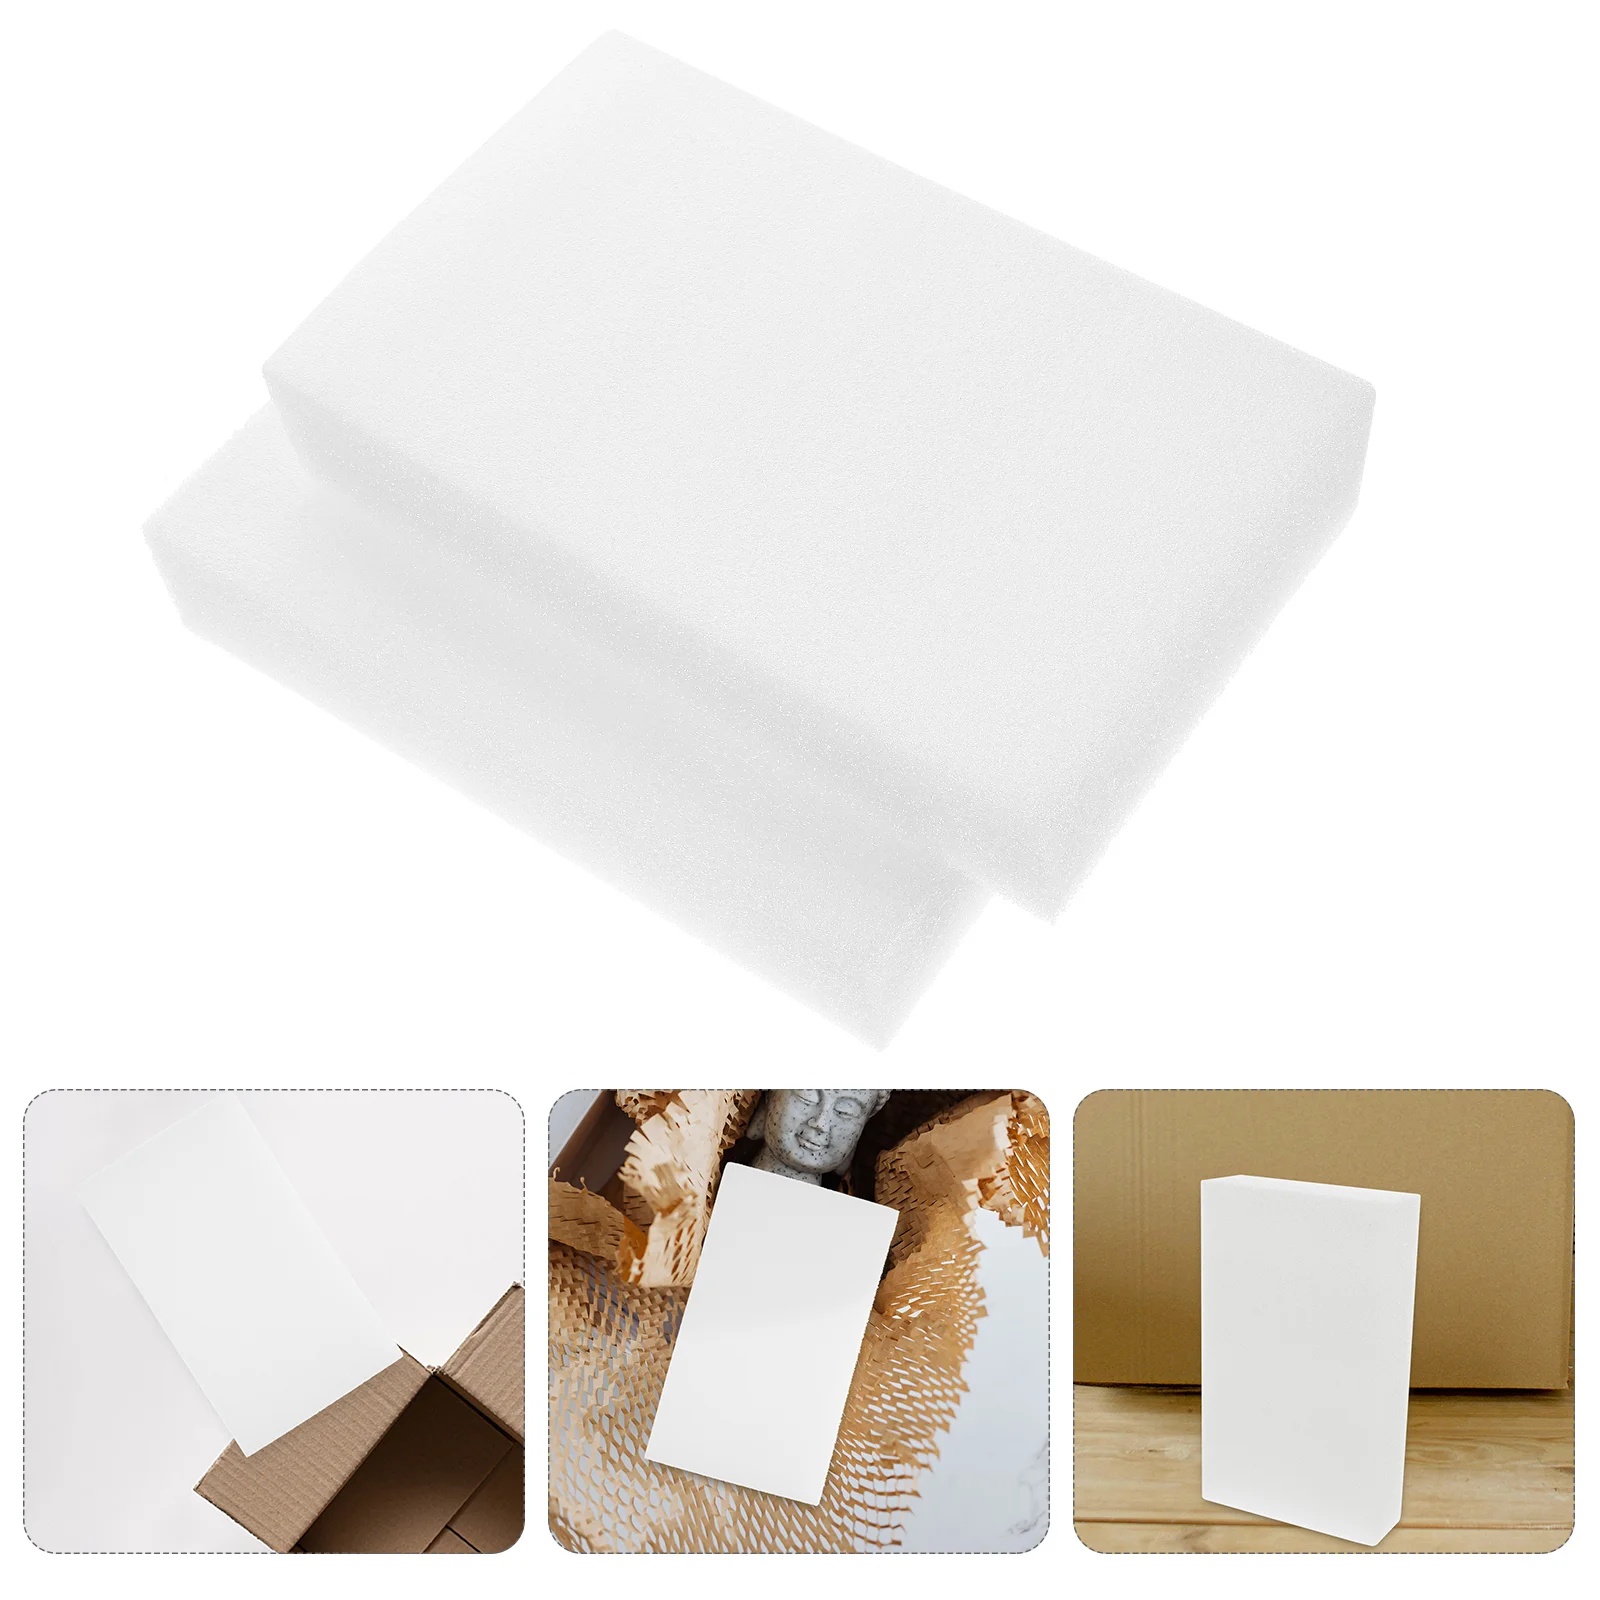 

2 Pcs Foam Pad Daily Use Board Crafts Insert Boards Packing Wrapping Liners Pearl Cotton Delivery